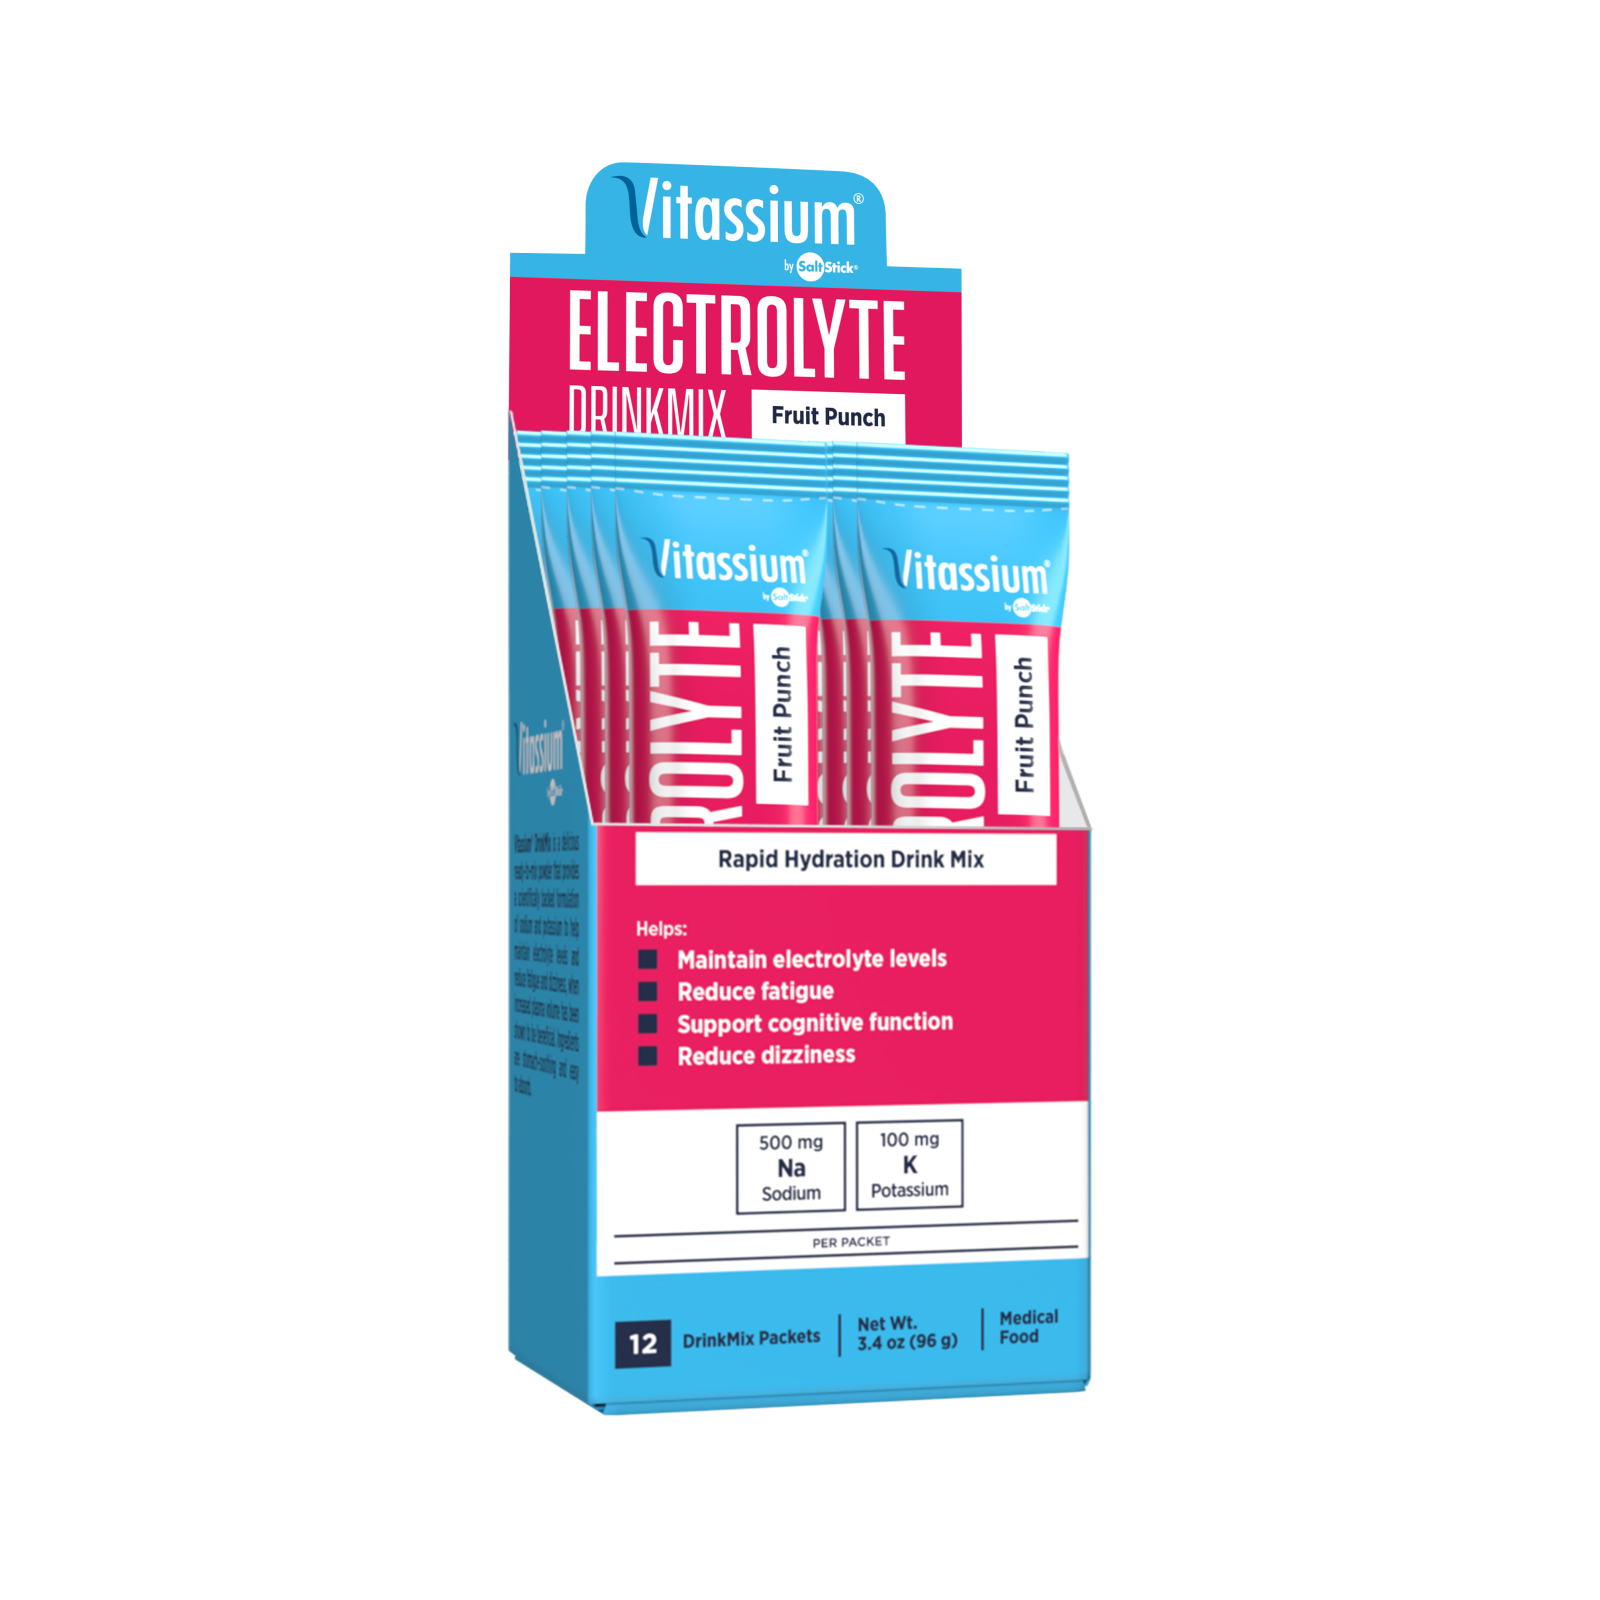 Vitassium Electrolyte Drink Mix Fruit Punch box of 12 stick packets